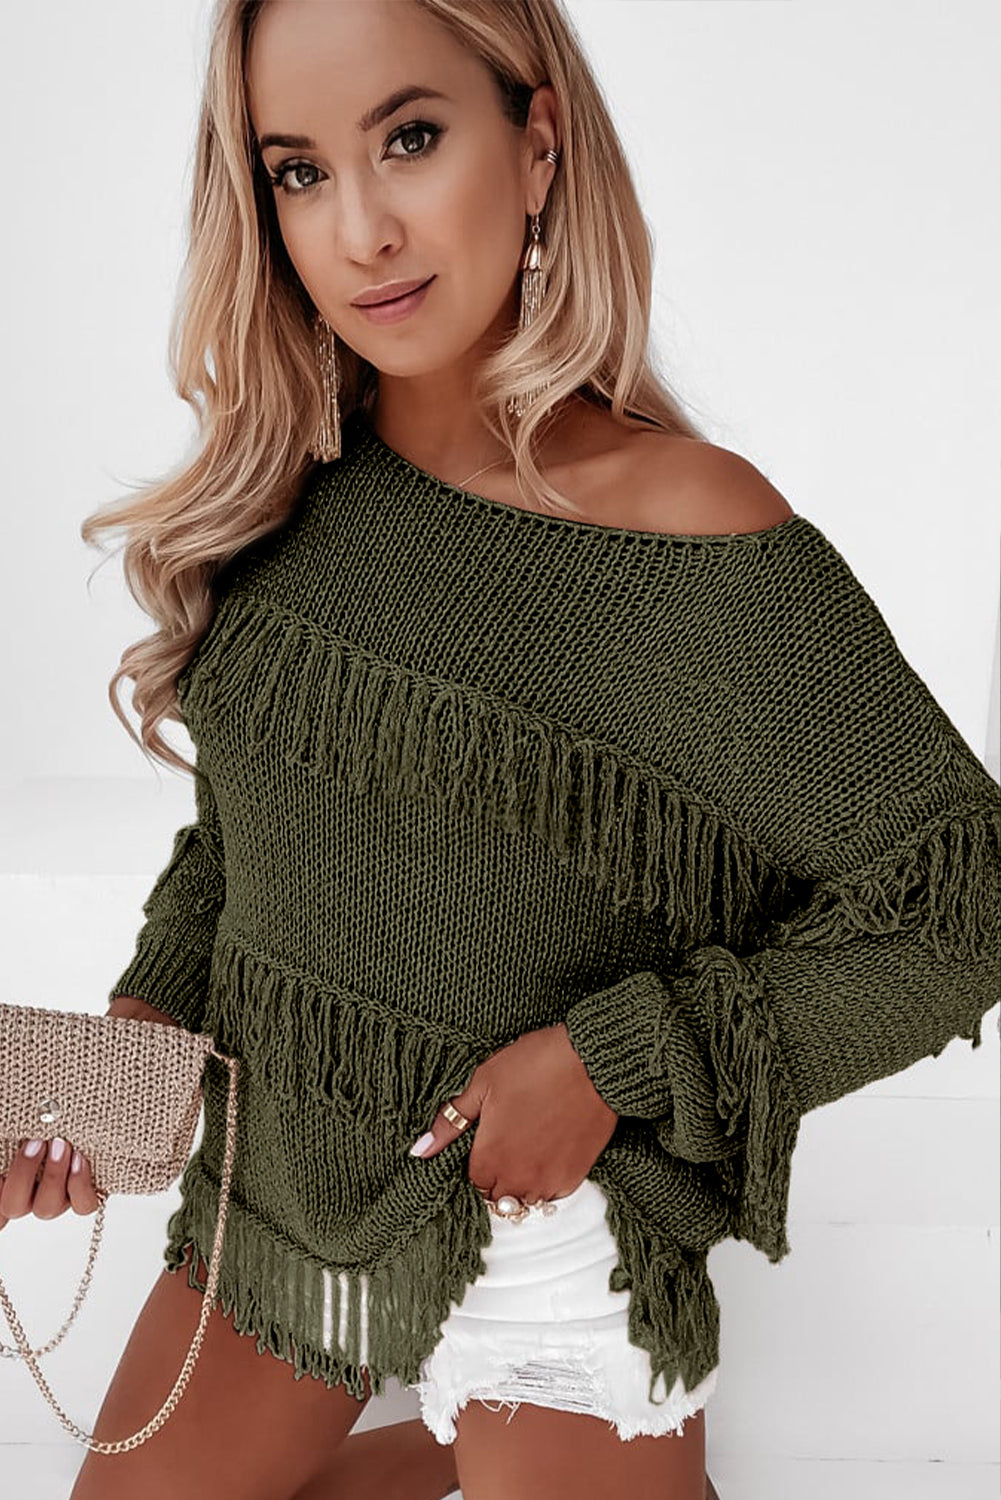 Boho Tasseled Knitted Sweater - women's sweater at TFC&H Co.